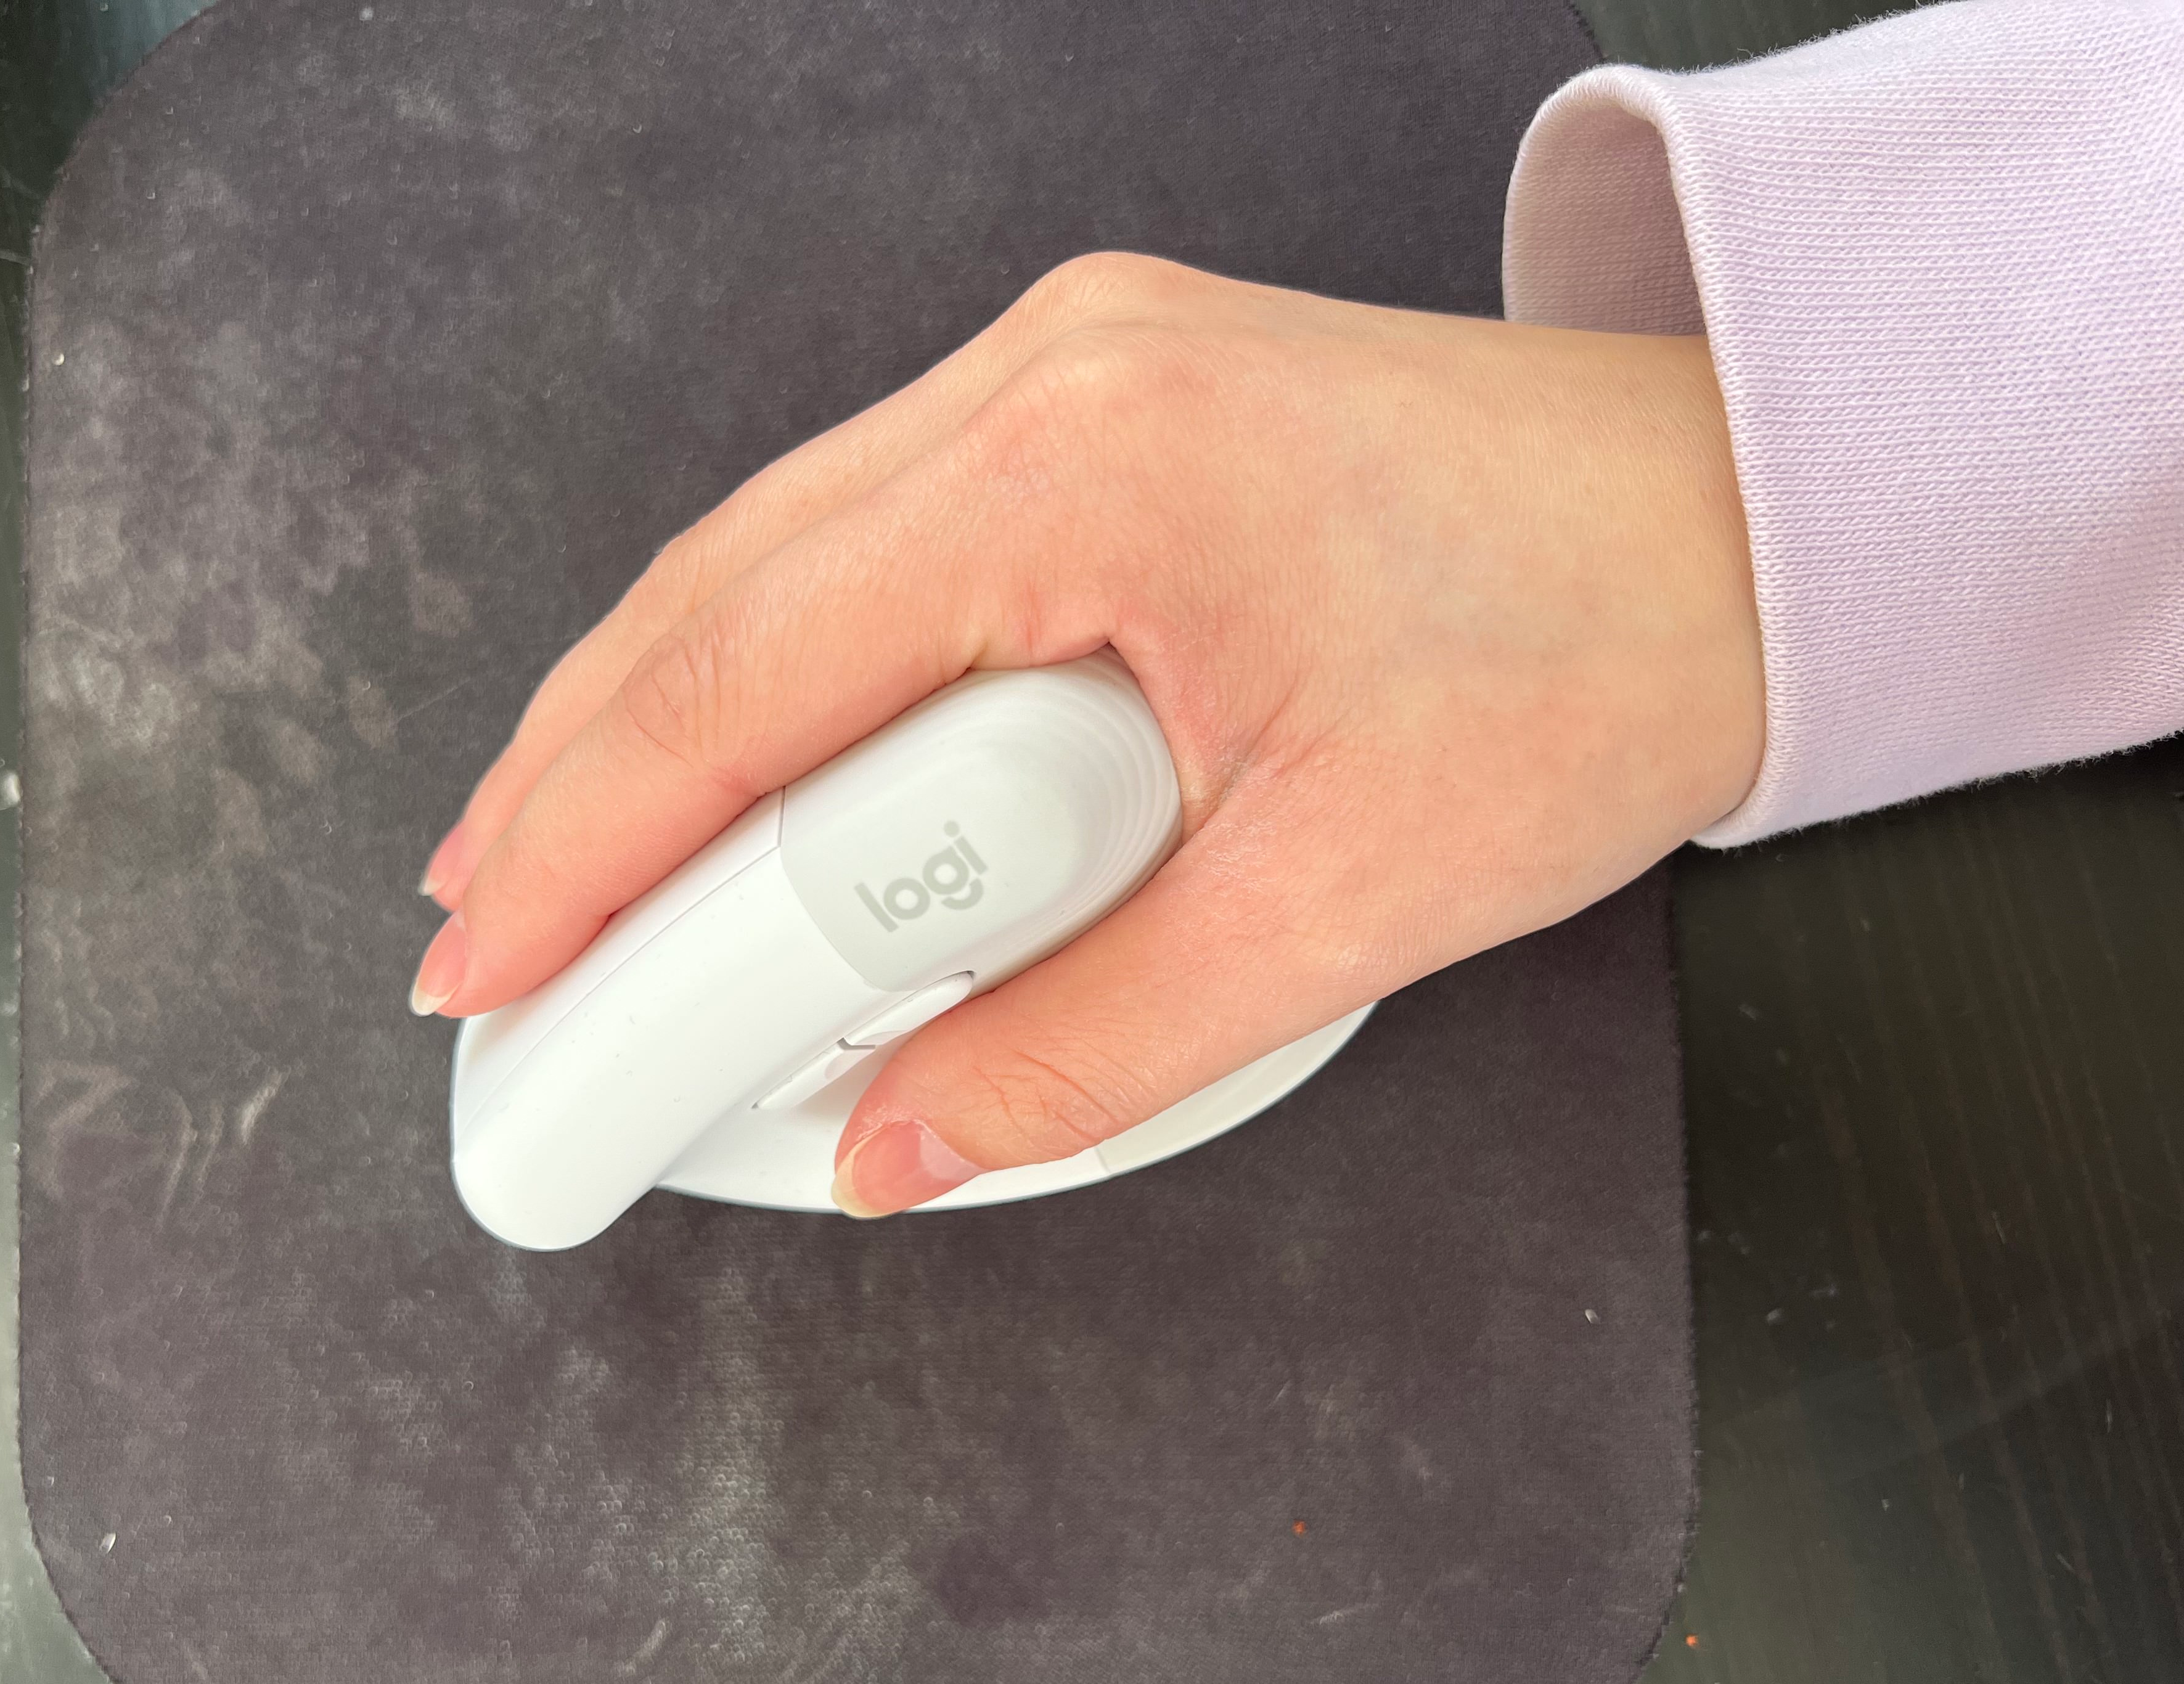 BuzzFeed editor holding white mouse